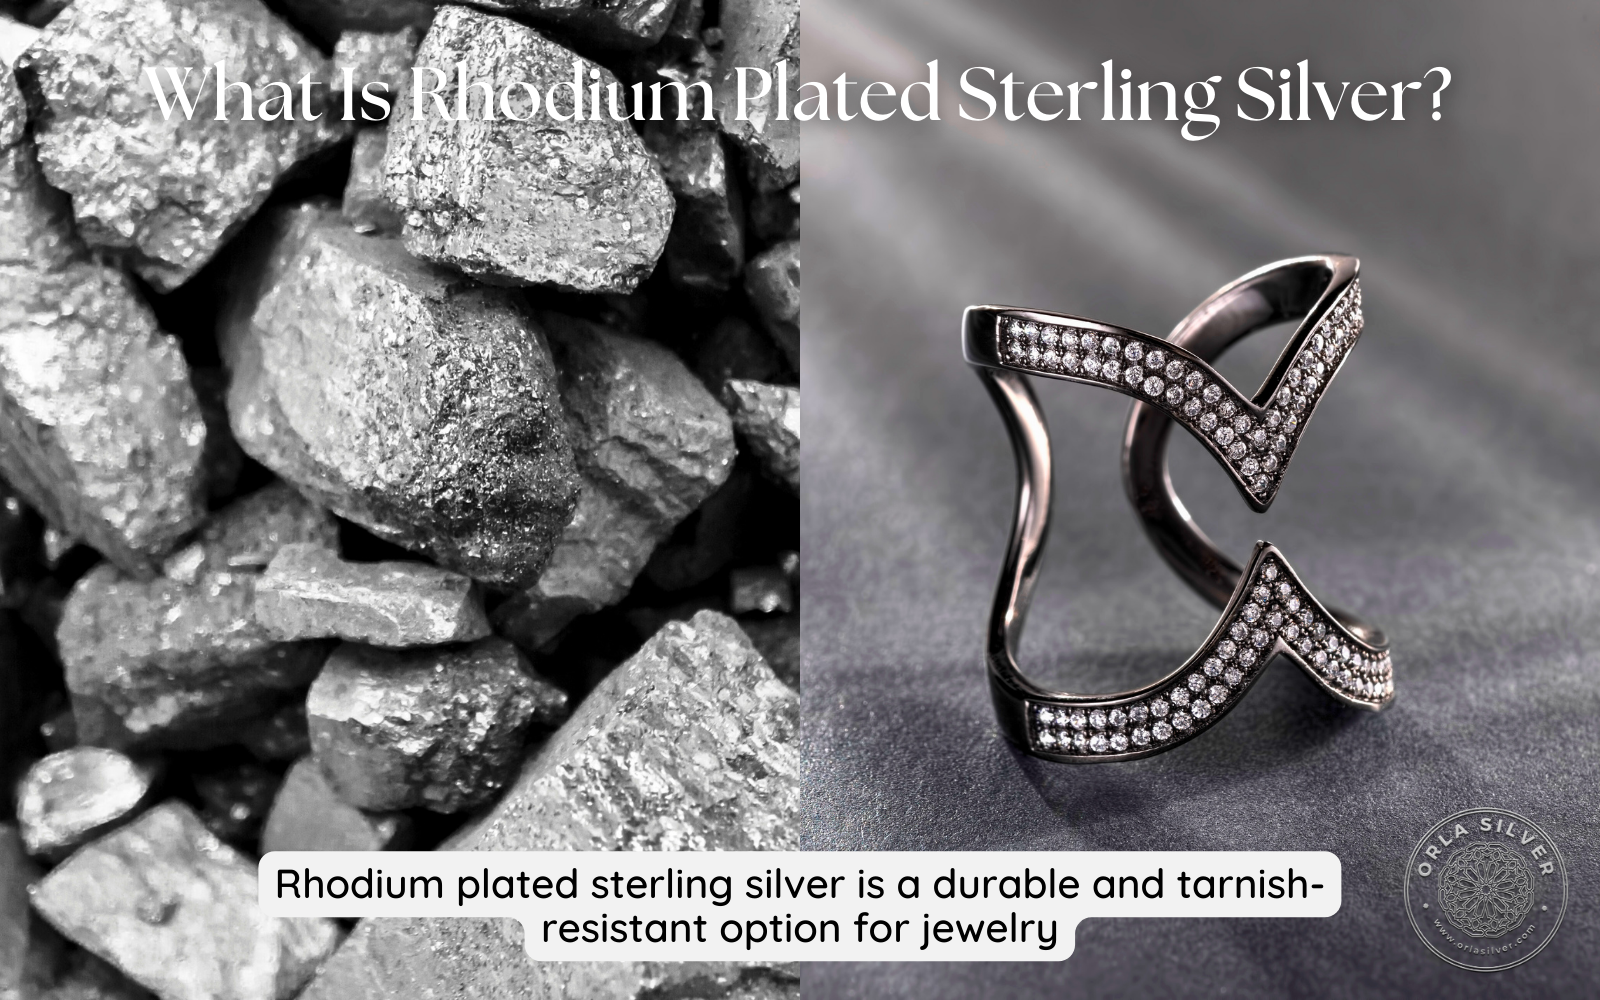 Rhodium plated sterling silver is a durable and tarnish-resistant option for jewelry.